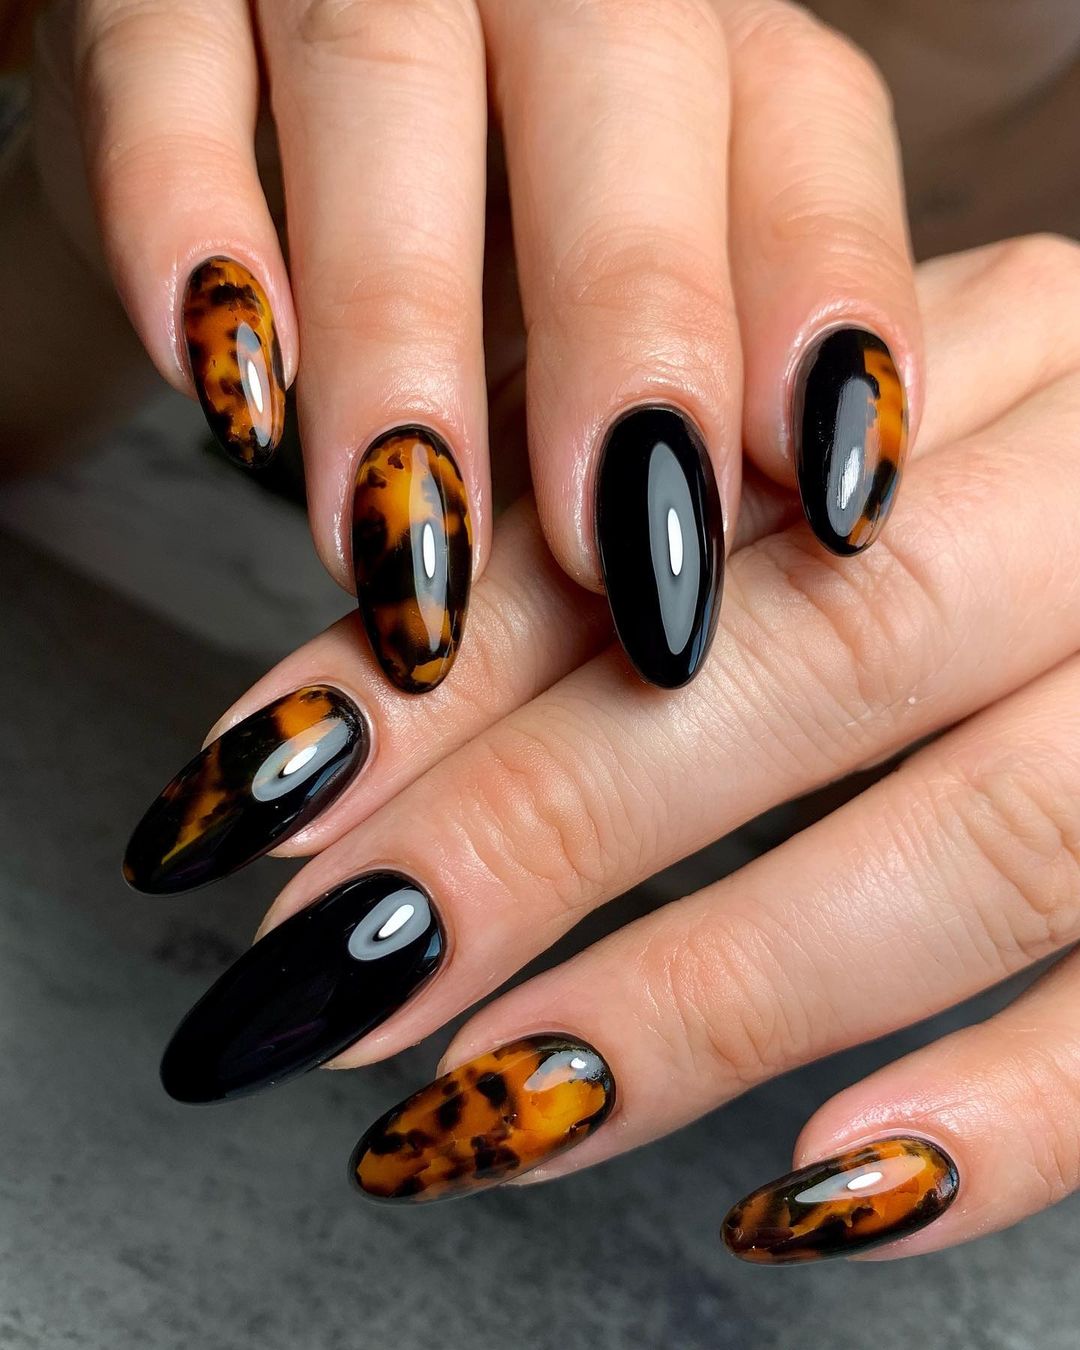 Nail Art Designs 16 TravelInspired Nail Art Designs for Your Next Holiday   Vogue  Vogue India